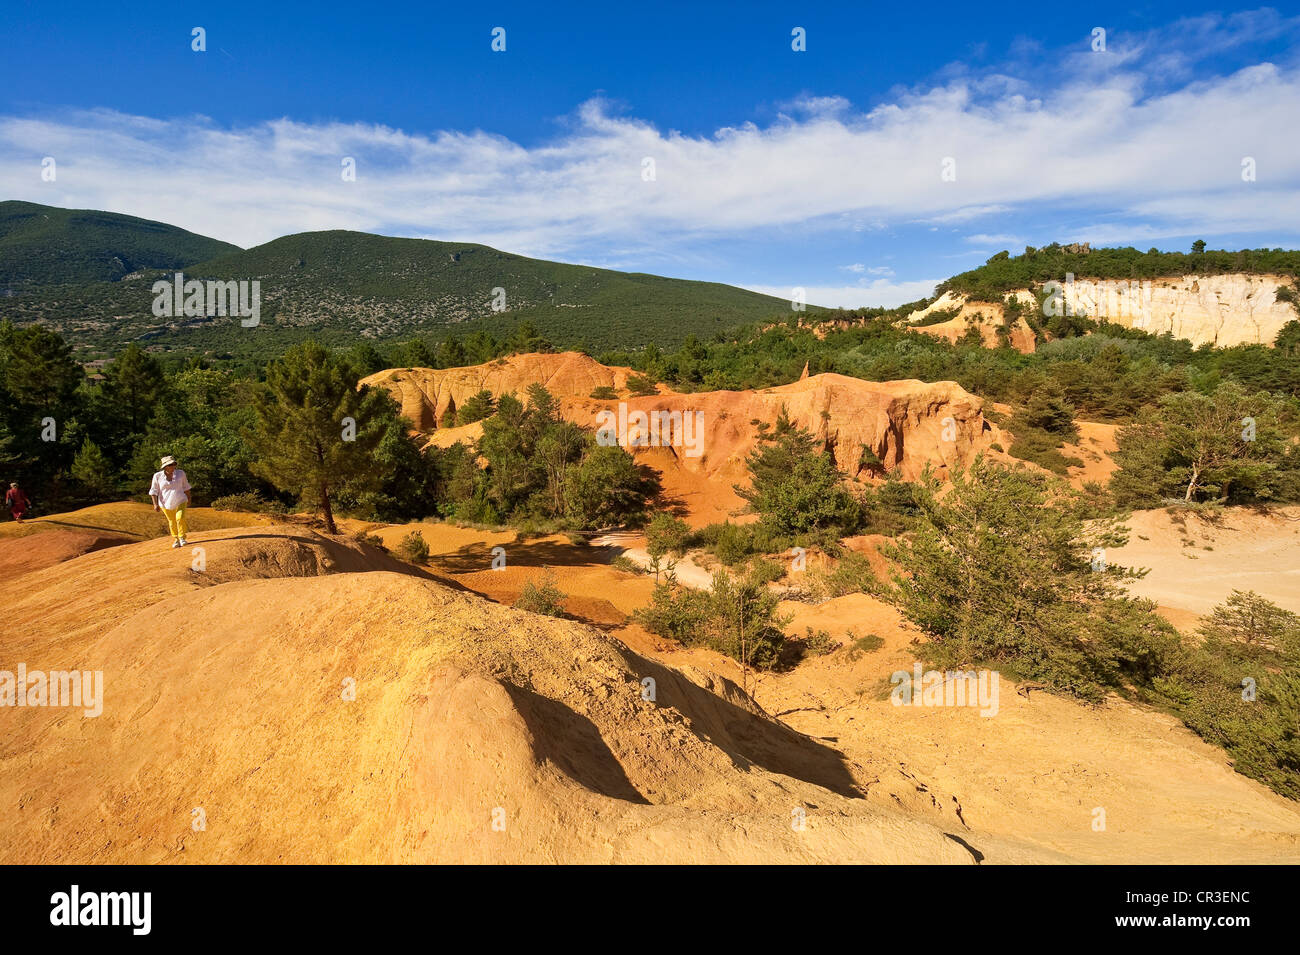 France, Vaucluse, Luberon, Rustrel, Provencal Colorado, old ochre quarries and their landscape carved by human exploitation Stock Photo